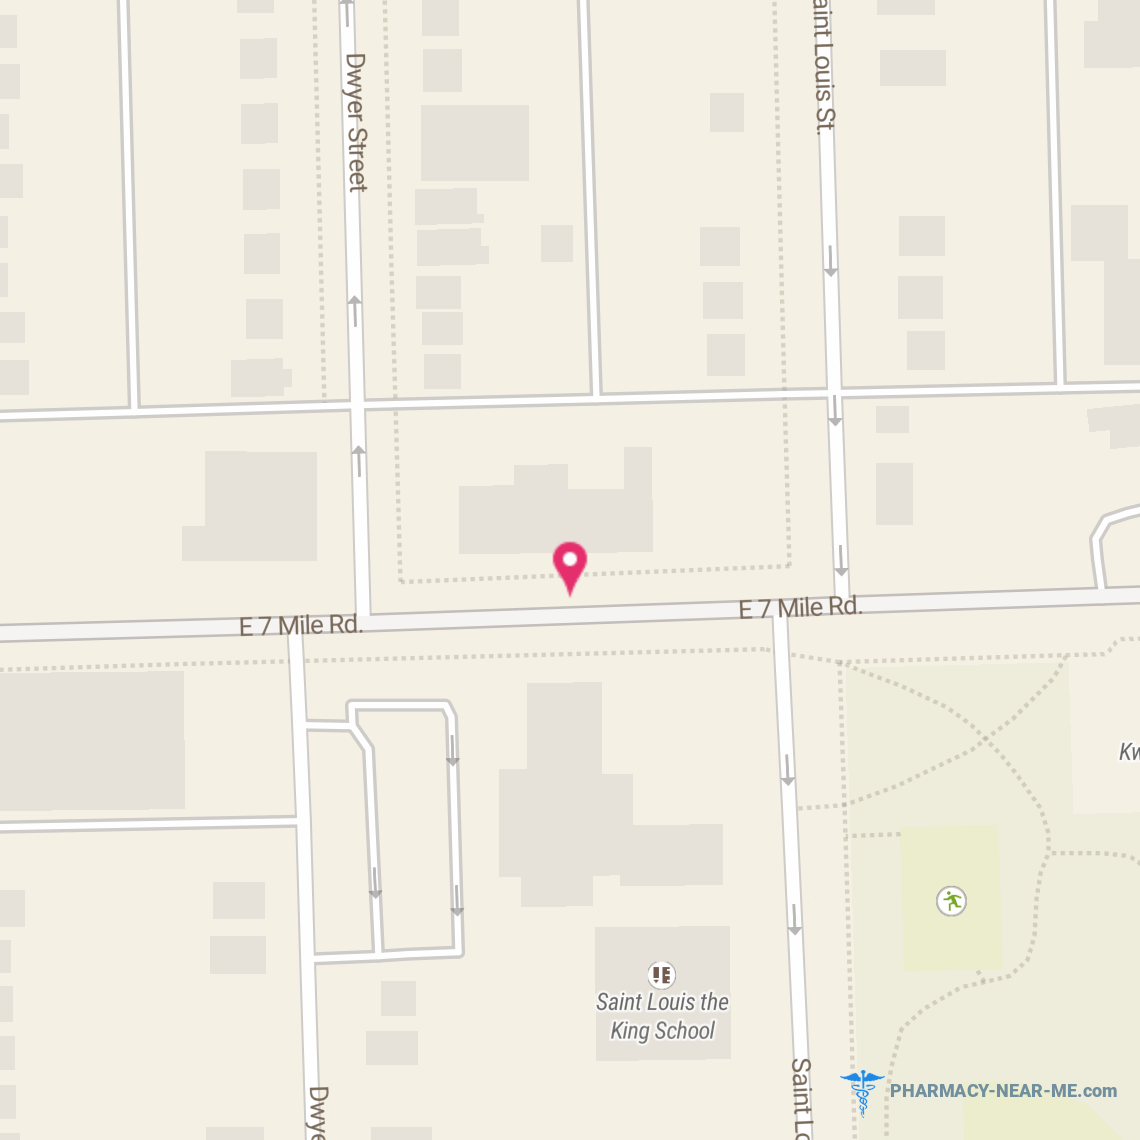 SACE INC - Pharmacy Hours, Phone, Reviews & Information: 8139 East 7 Mile Road, Detroit, Michigan 48234, United States